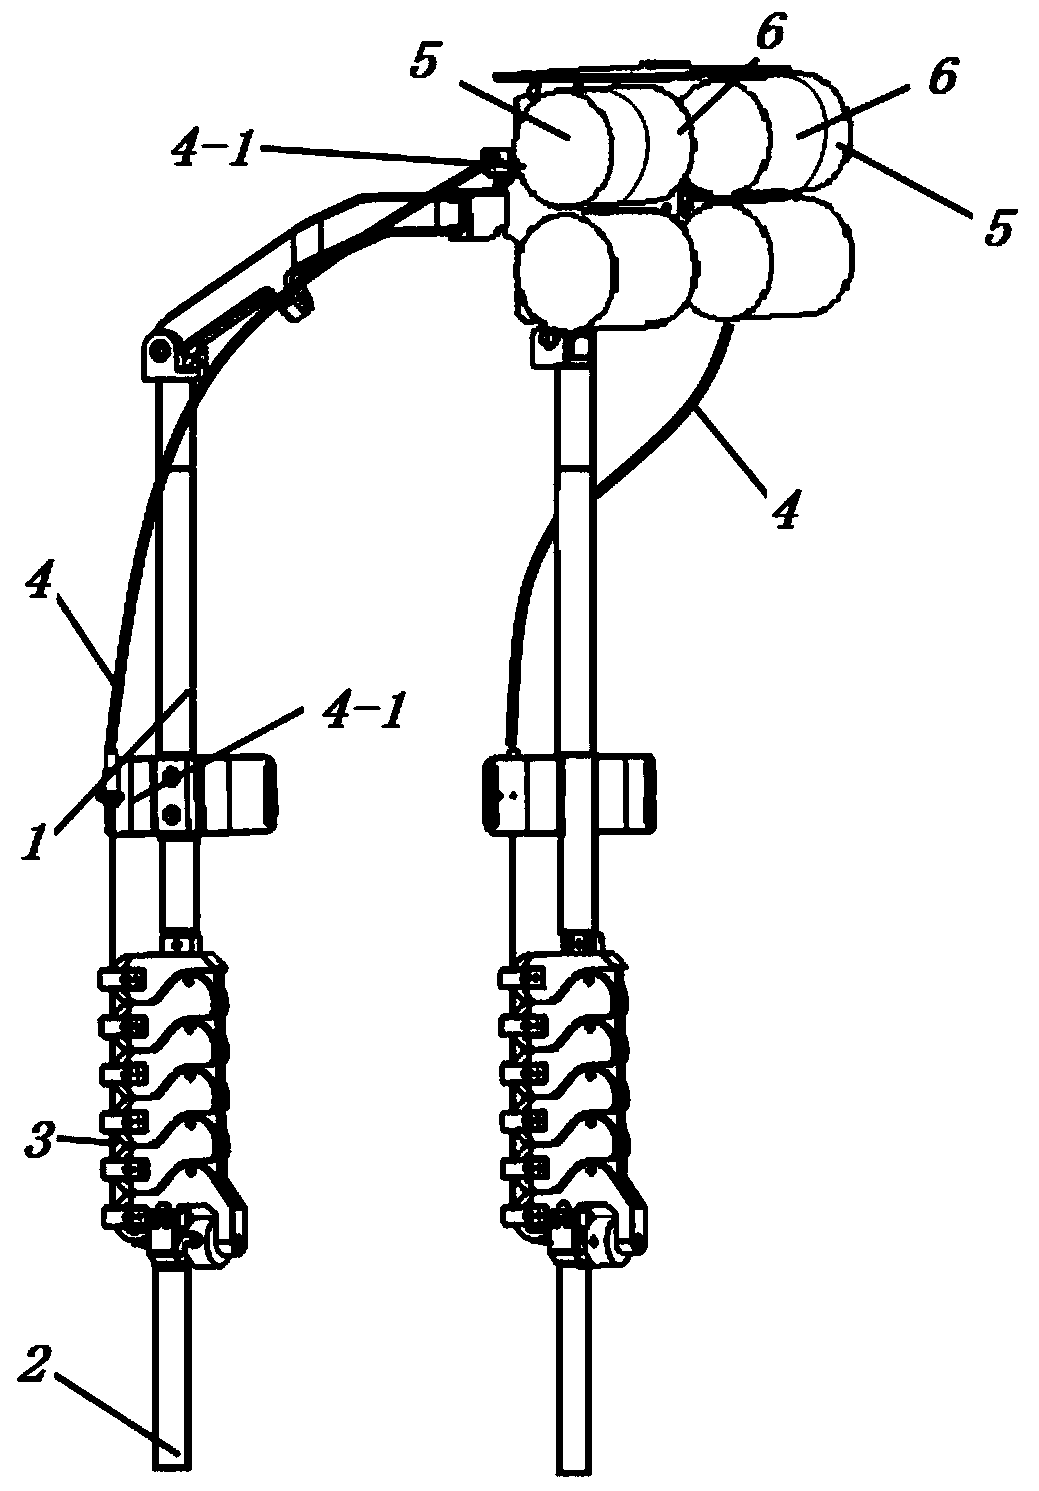 Self-adaption knee joint mechanism and device used for wearable exoskeleton